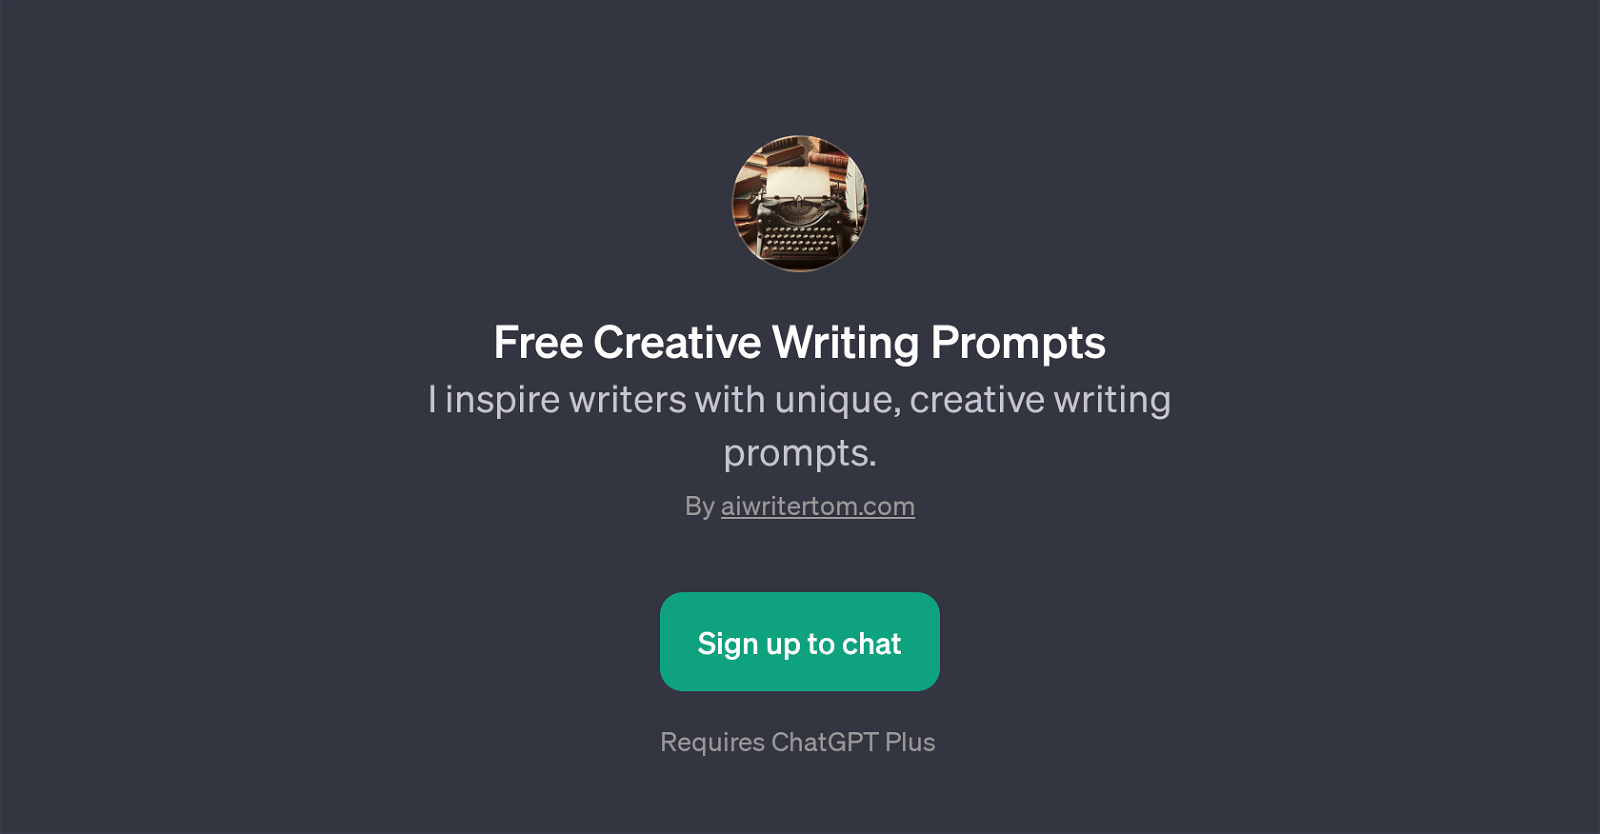 Free Creative Writing Prompts website